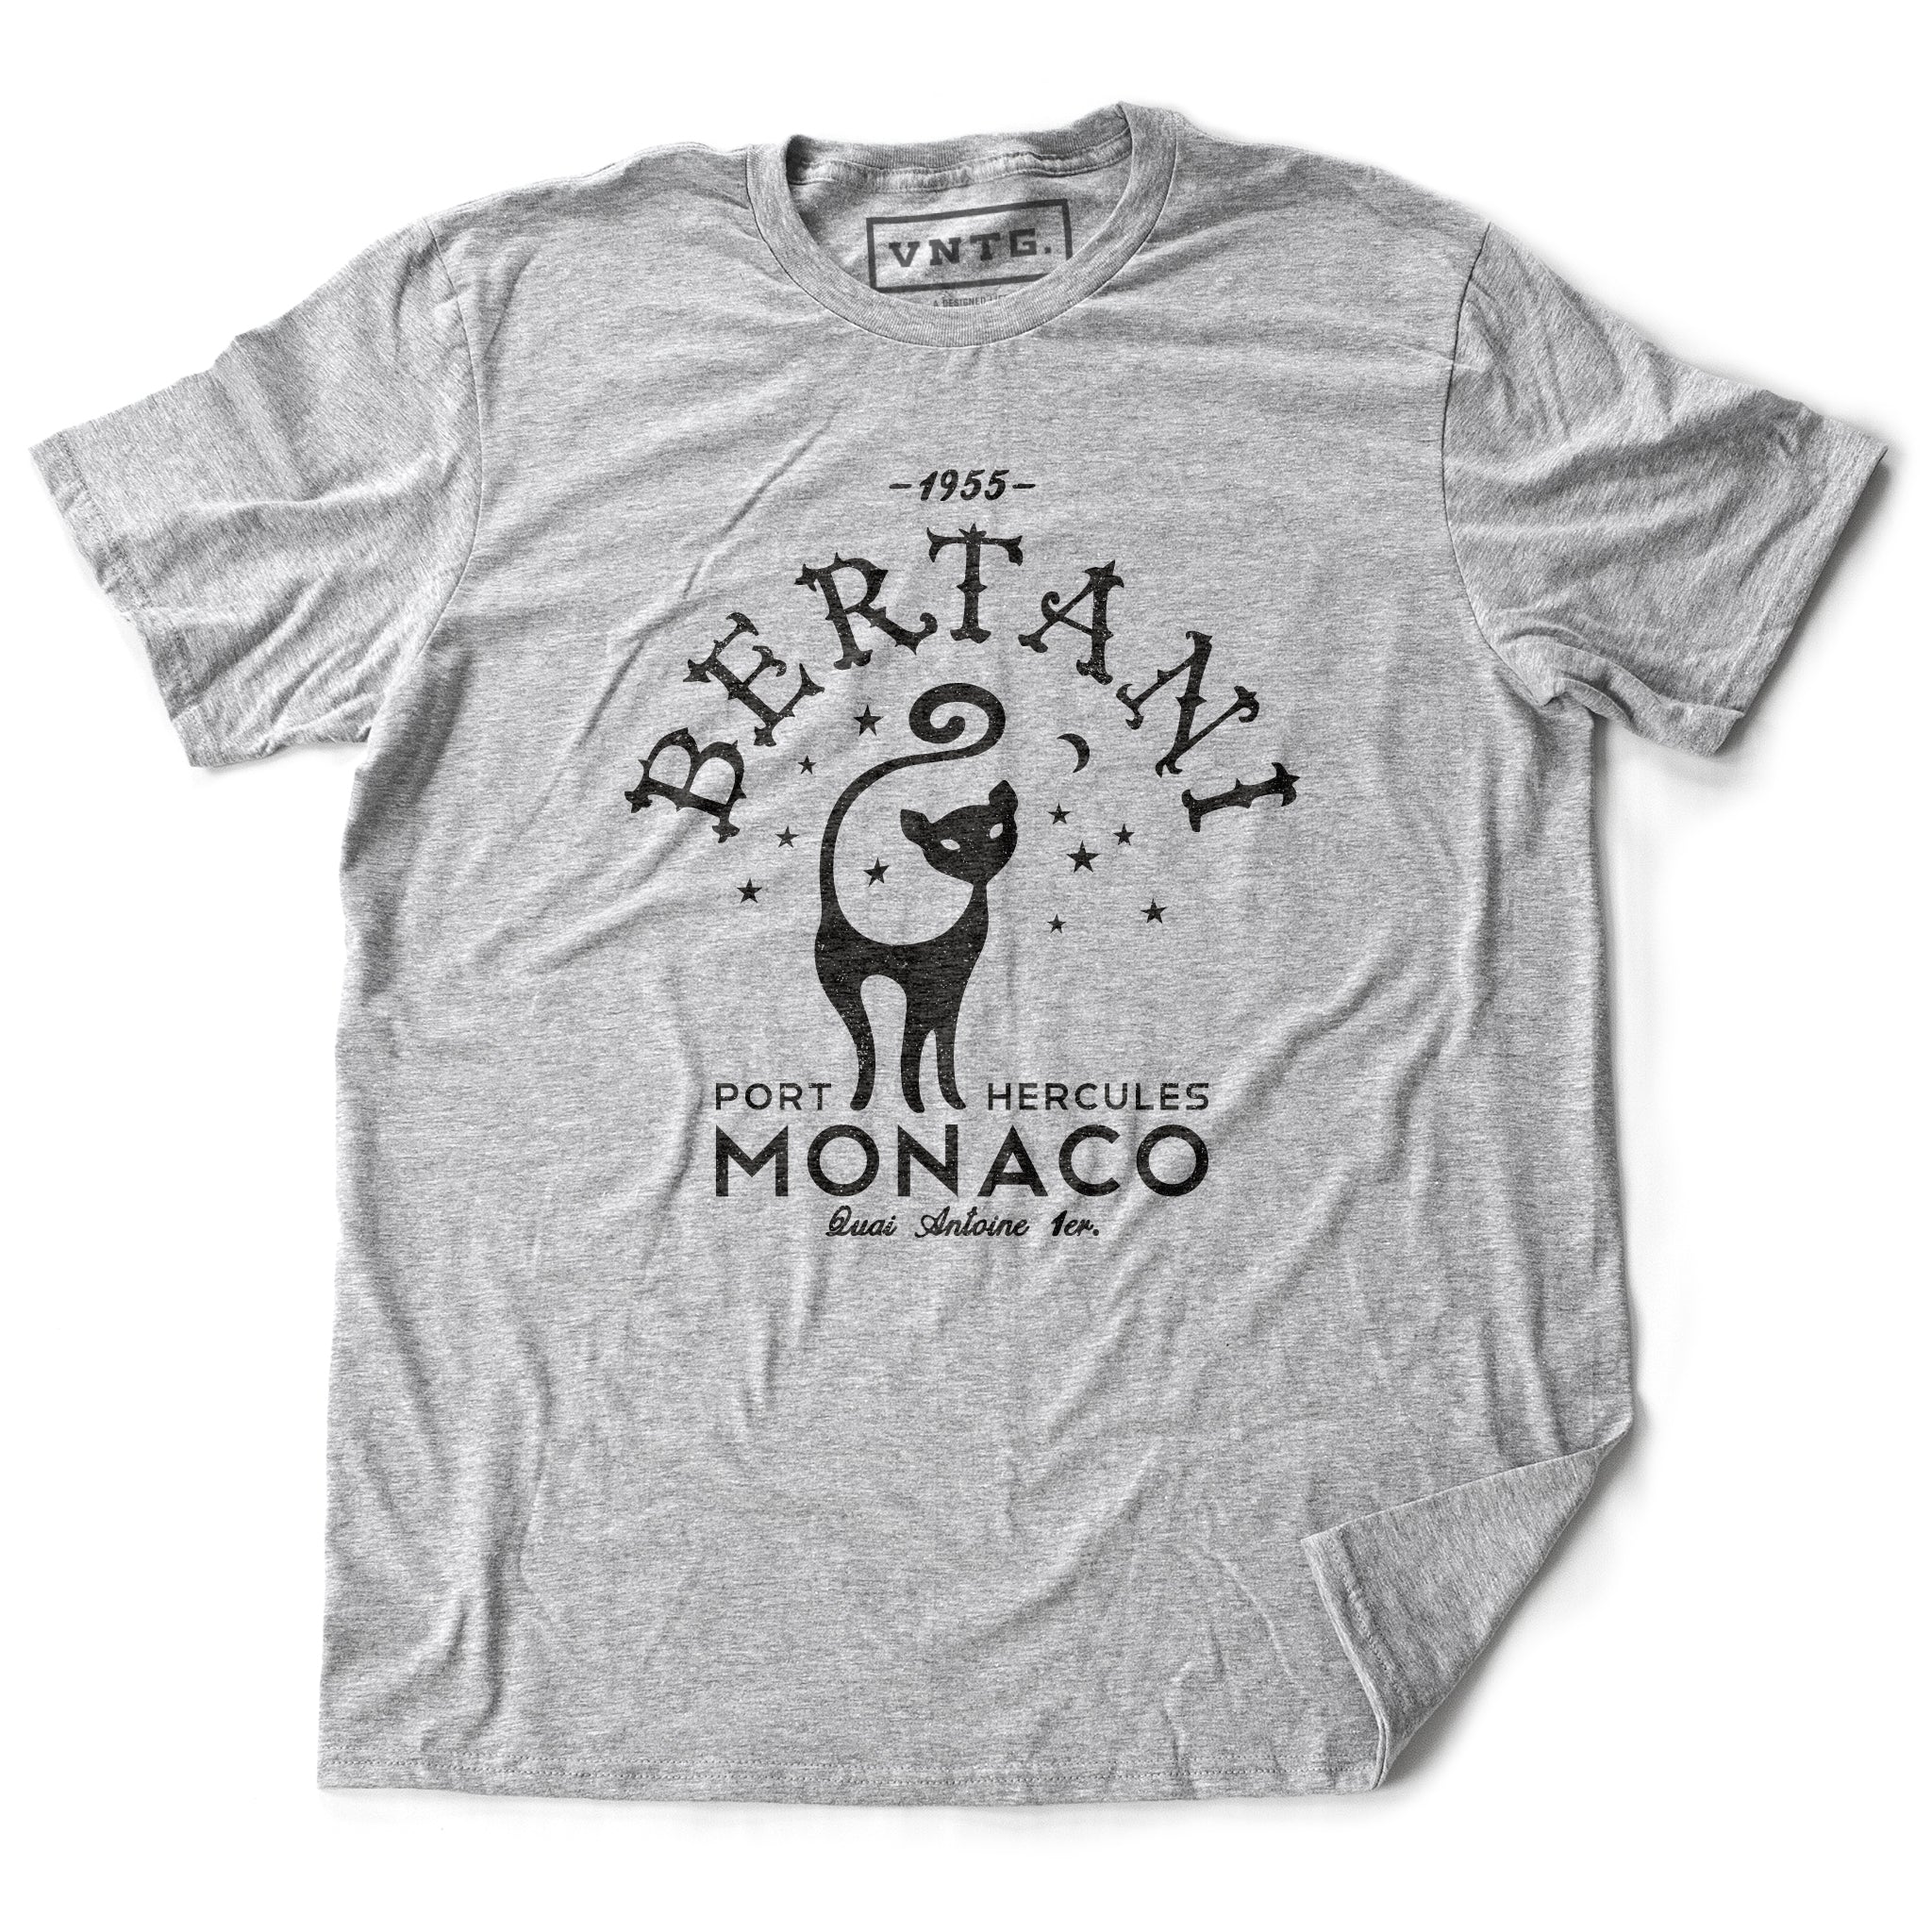 A vintage-look, retro t-shirt that was inspired by the Alfred Hitchcock film To Catch a Thief, and is a tribute to the restaurant Bertani owned by the friend of Cary Grant’s character in the film. It features old worlds typography around the image of a cat, meant to symbolize ‘John Robie The Cat’—the infamous cat burglar portrayed by Grant and loved by Grace Kelly. This shirt is elegant in Classic Heather Gray, by fashion brand VNTG., from wolfsaint.net